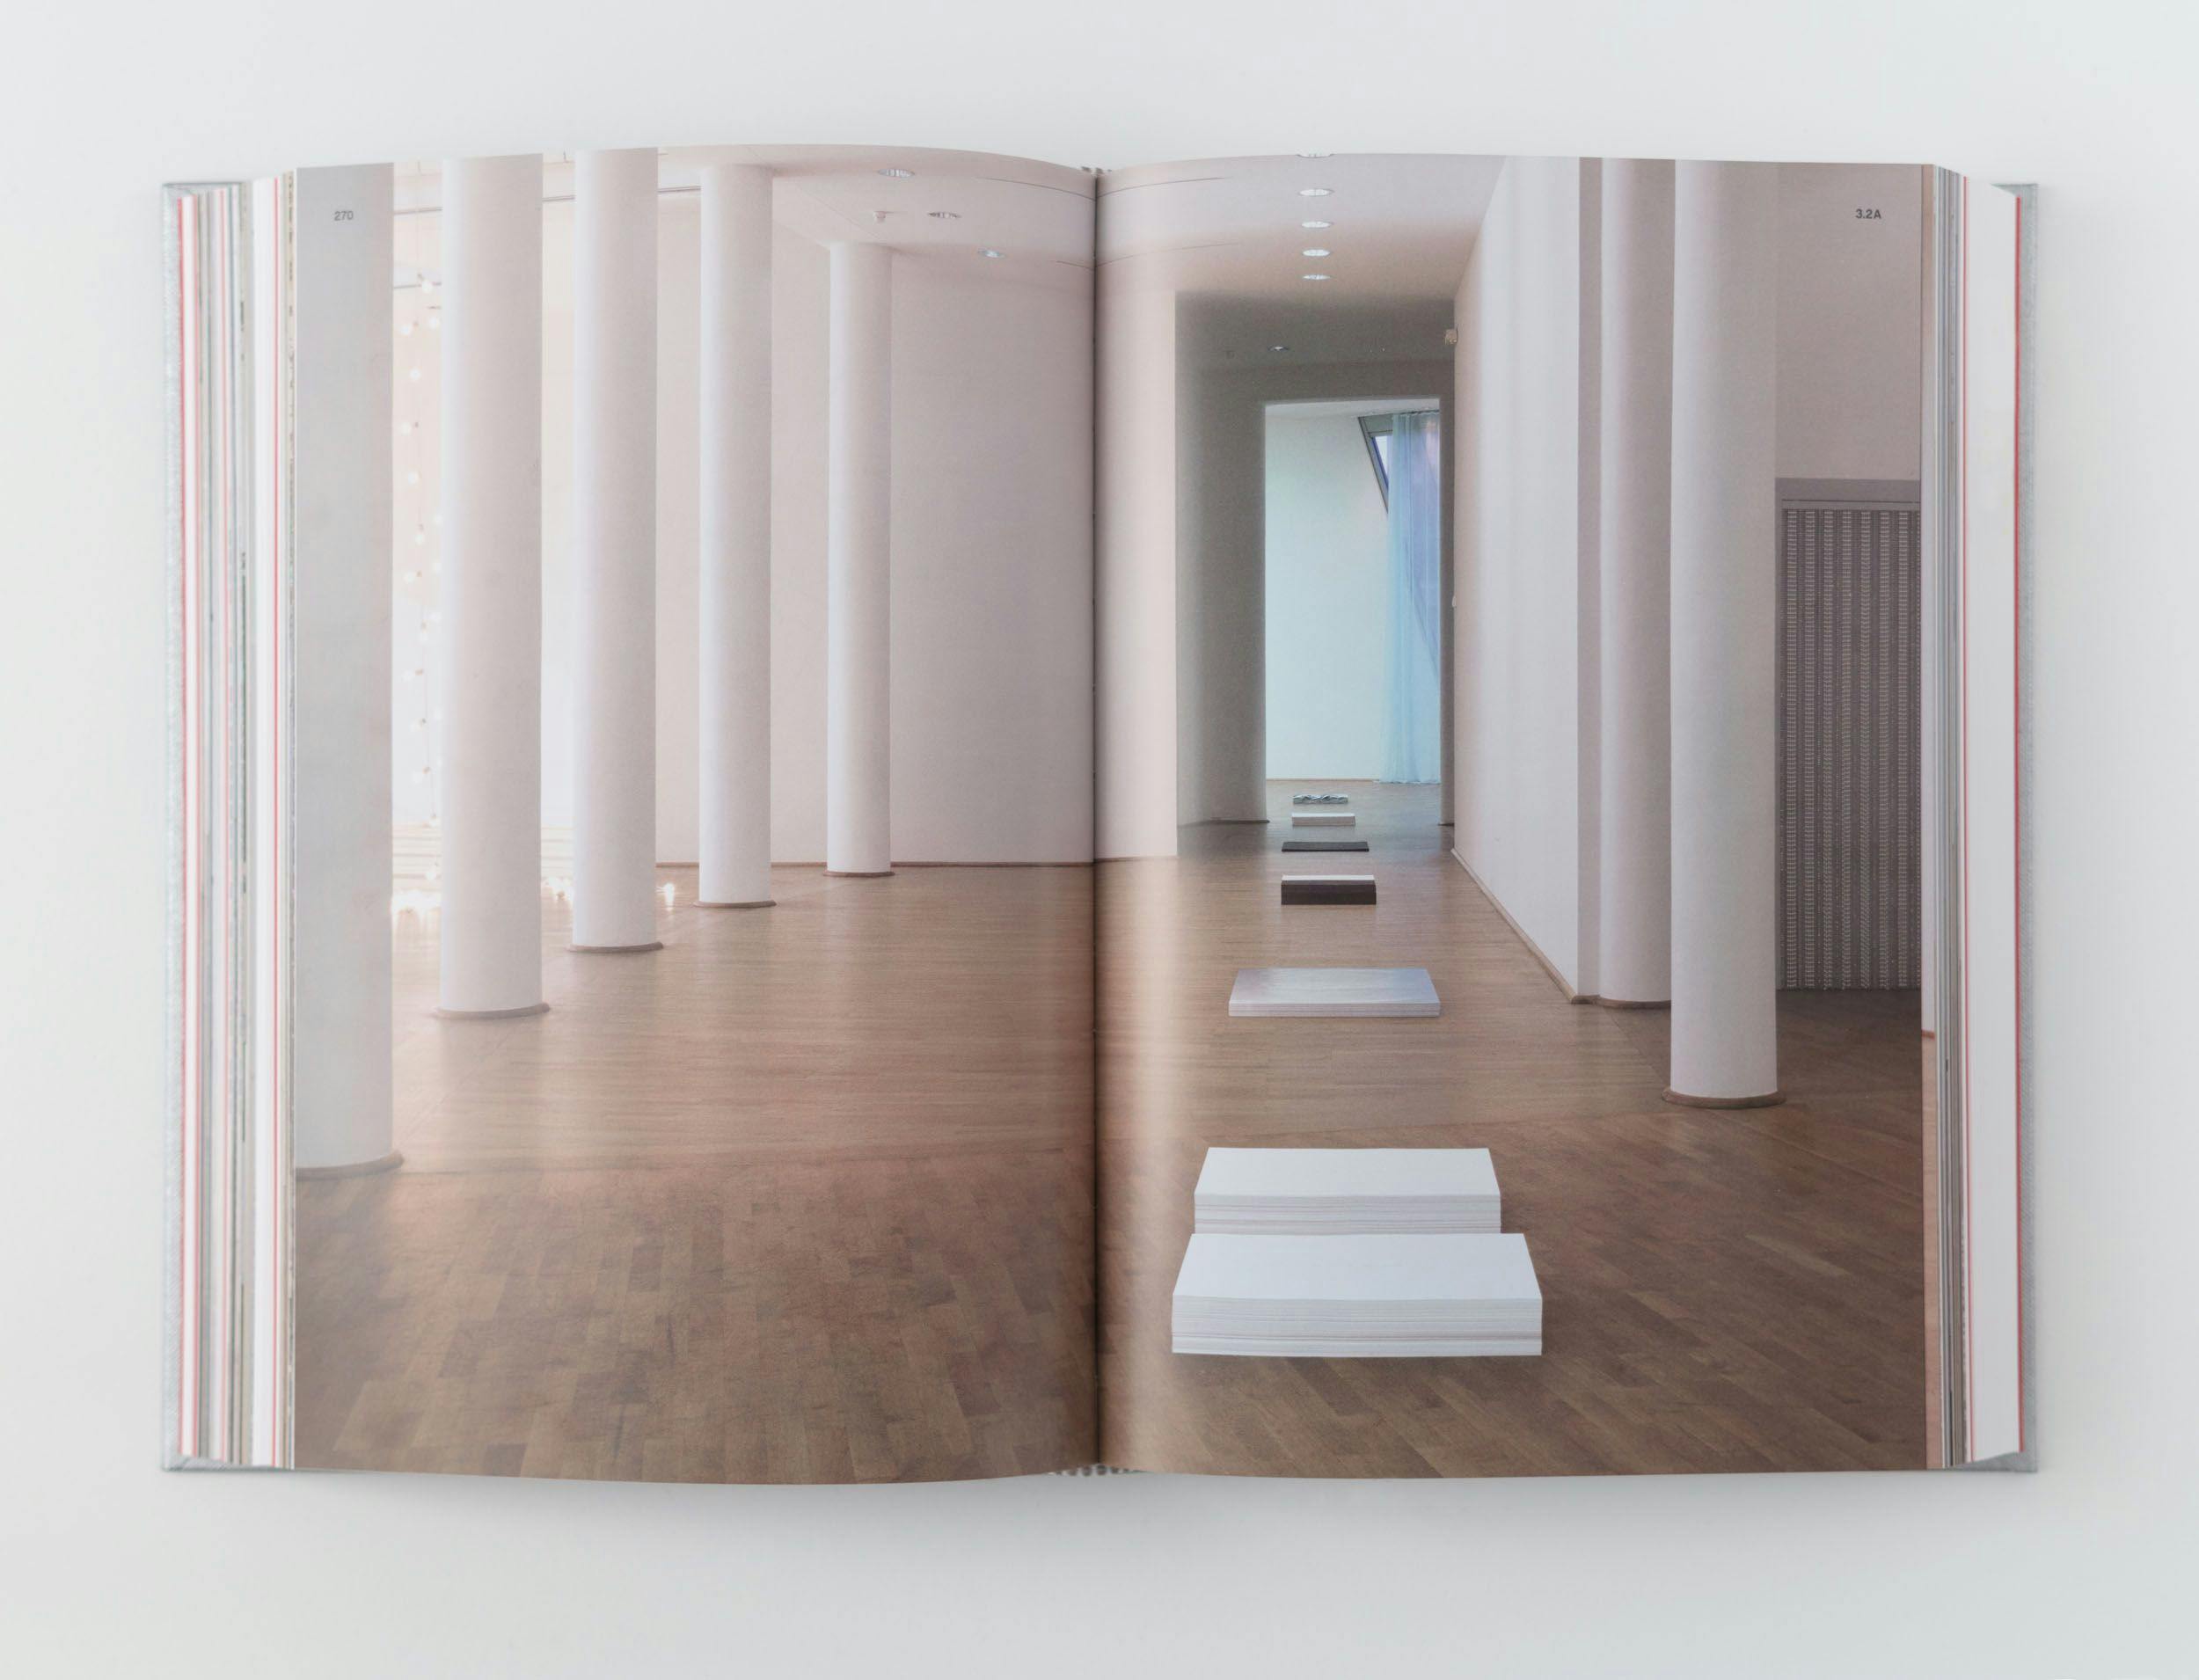 A photograph of a spread from the book Felix Gonzalez-Torres: Specific Objects Without Specific Form, dated 2016.